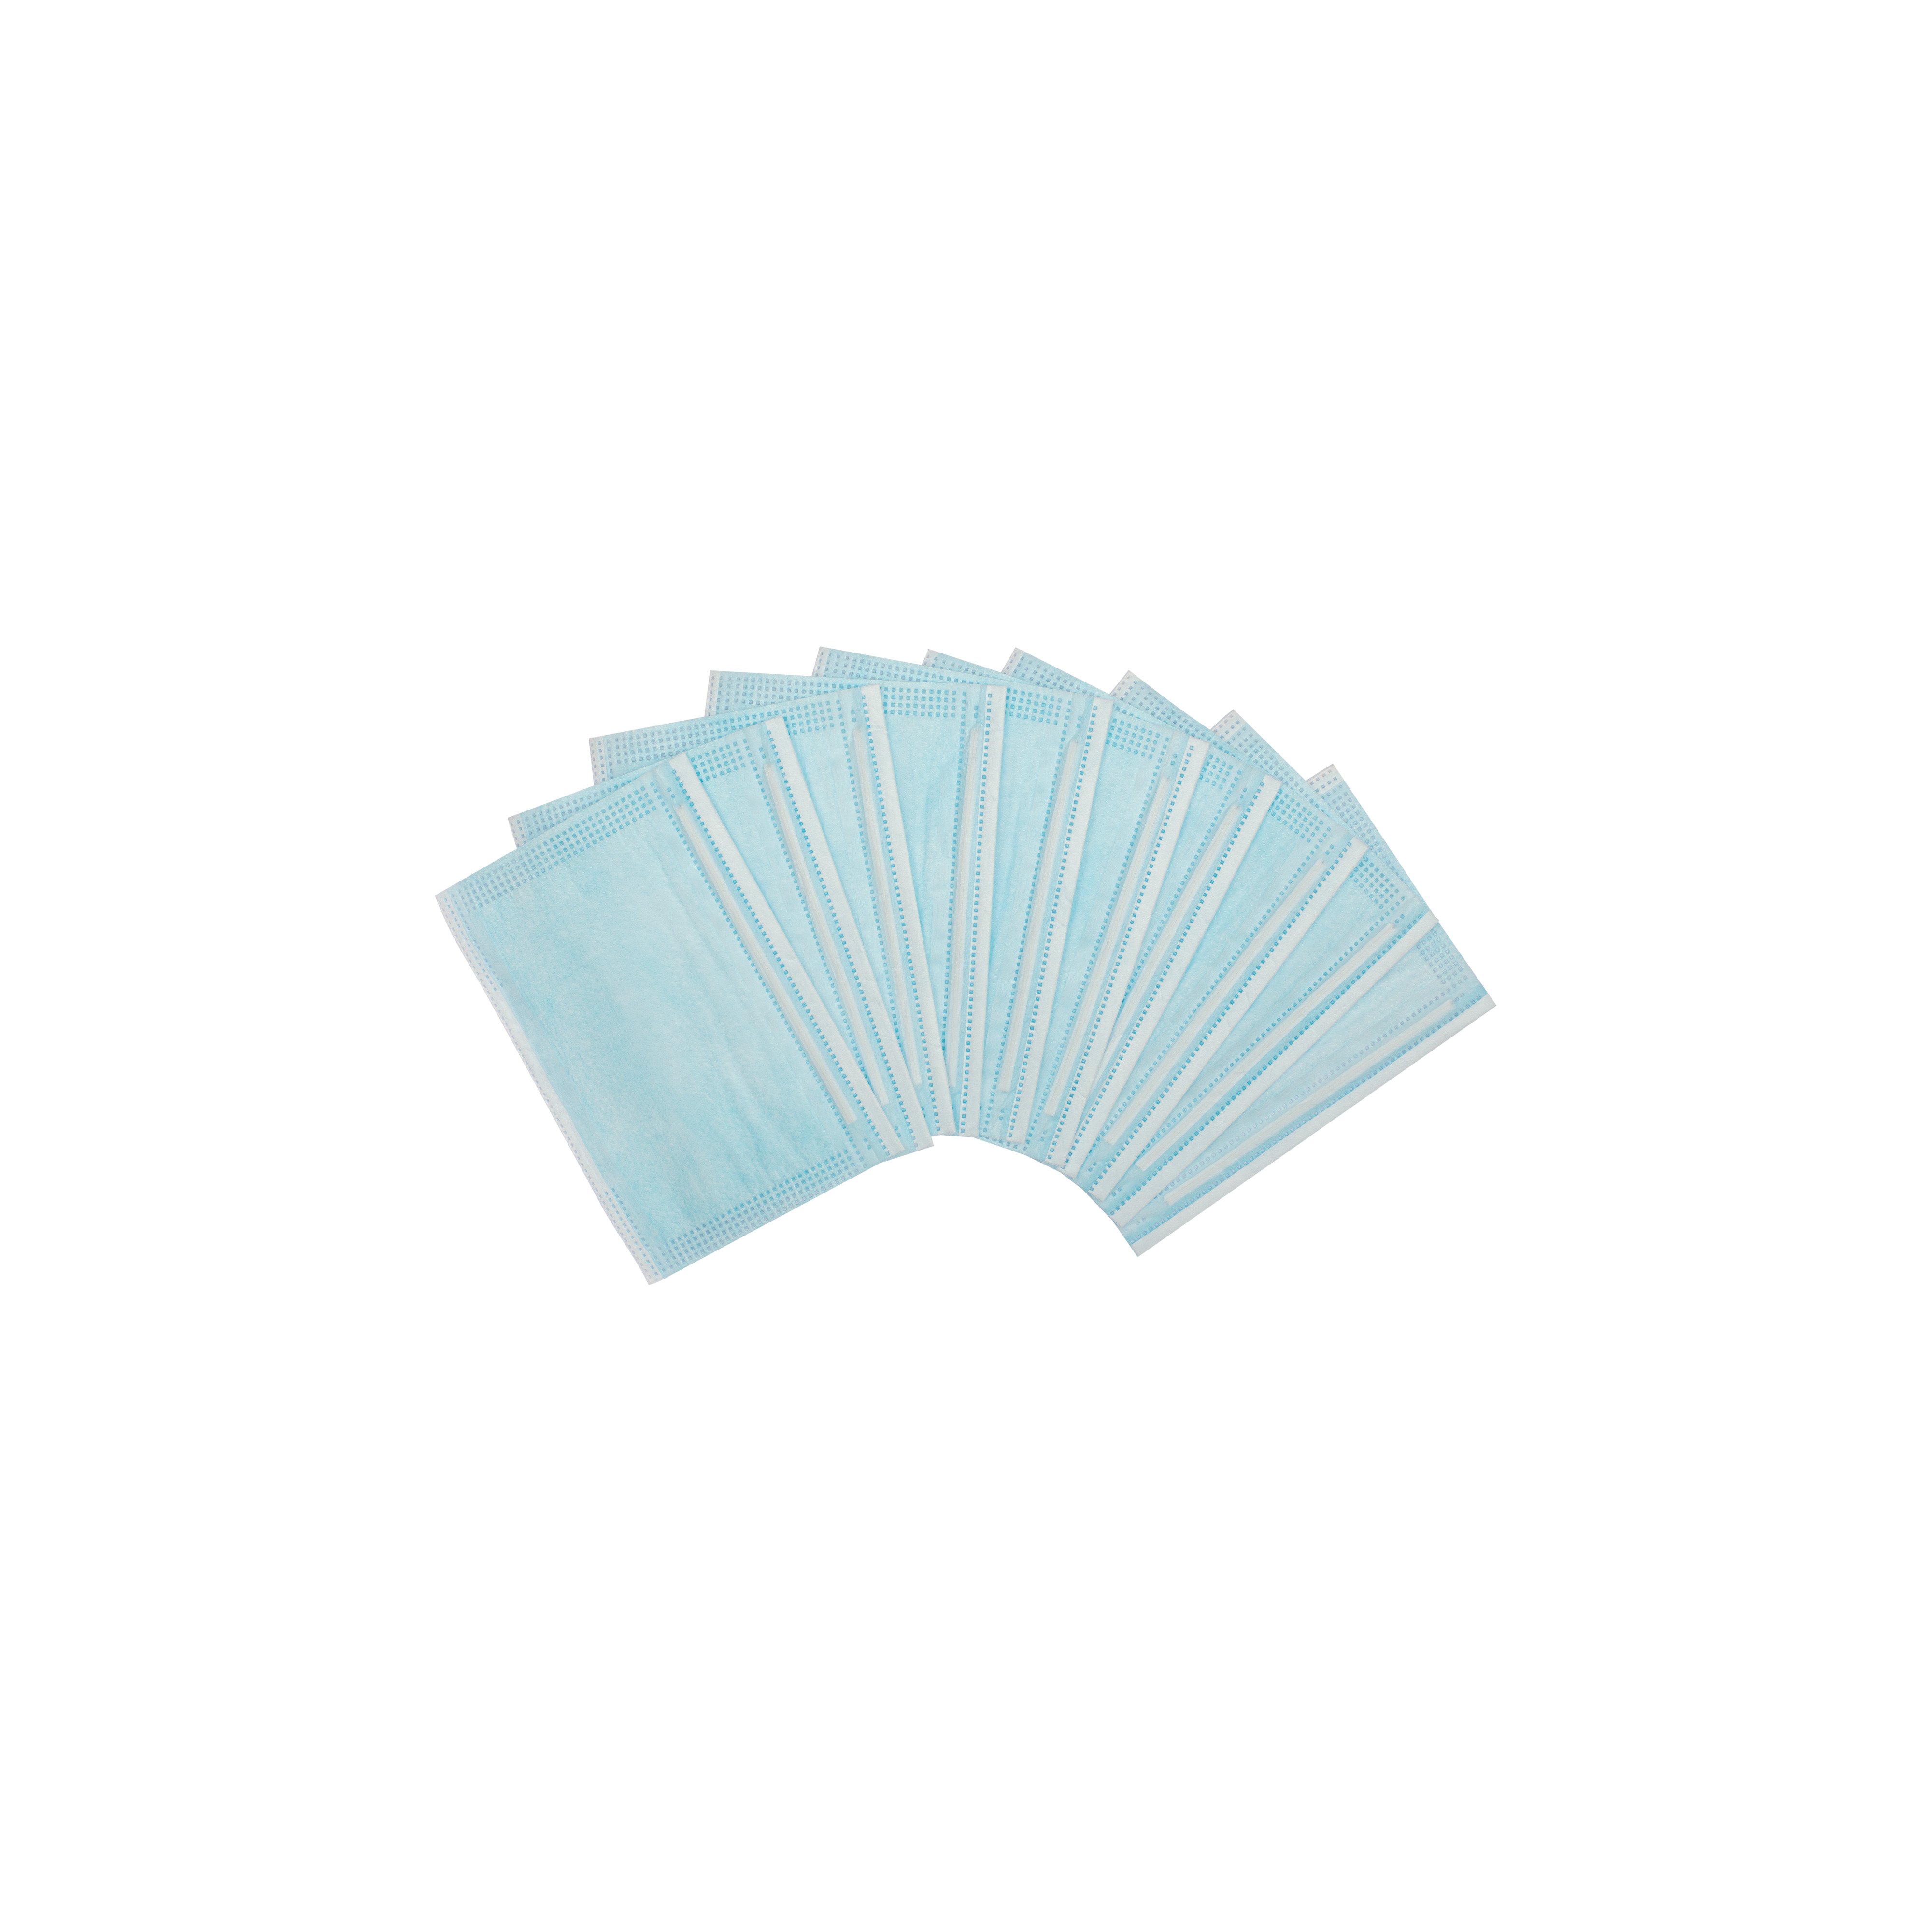 Maskfilter (Pack of 10) - white, one size product image